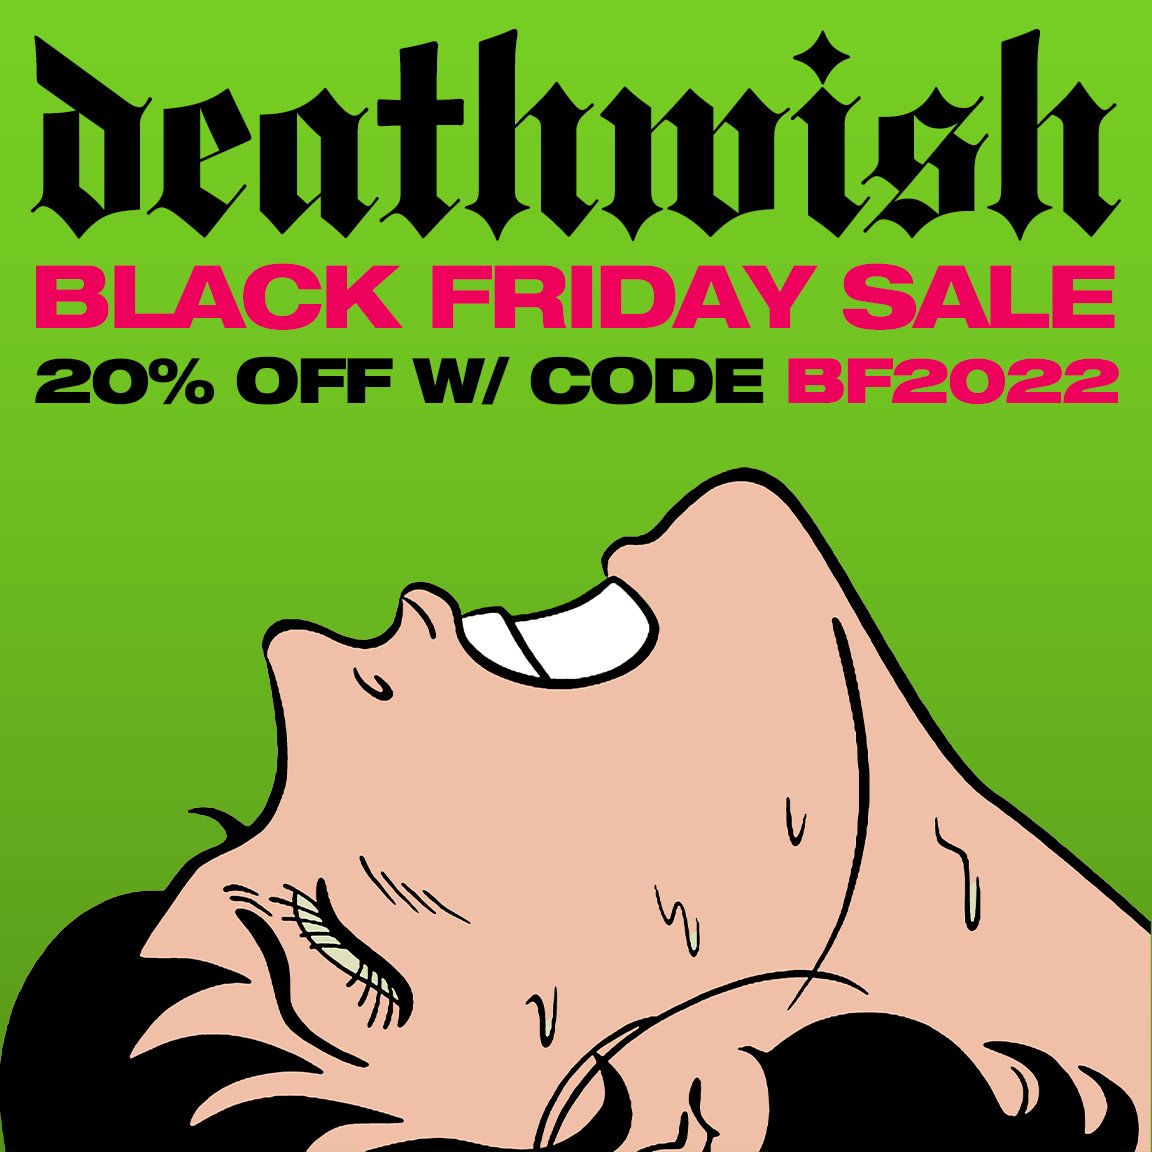 🚨Our Black Friday event is live! Save 20% storewide with code “BF2022” at checkout. We’re also offering limited Blackened Apparel now until Monday. Don’t miss out! ➔ deathwishinc.eu 

Excludes pre-orders, subscriptions & new items. Everything ends on Monday, Nov. 28th.